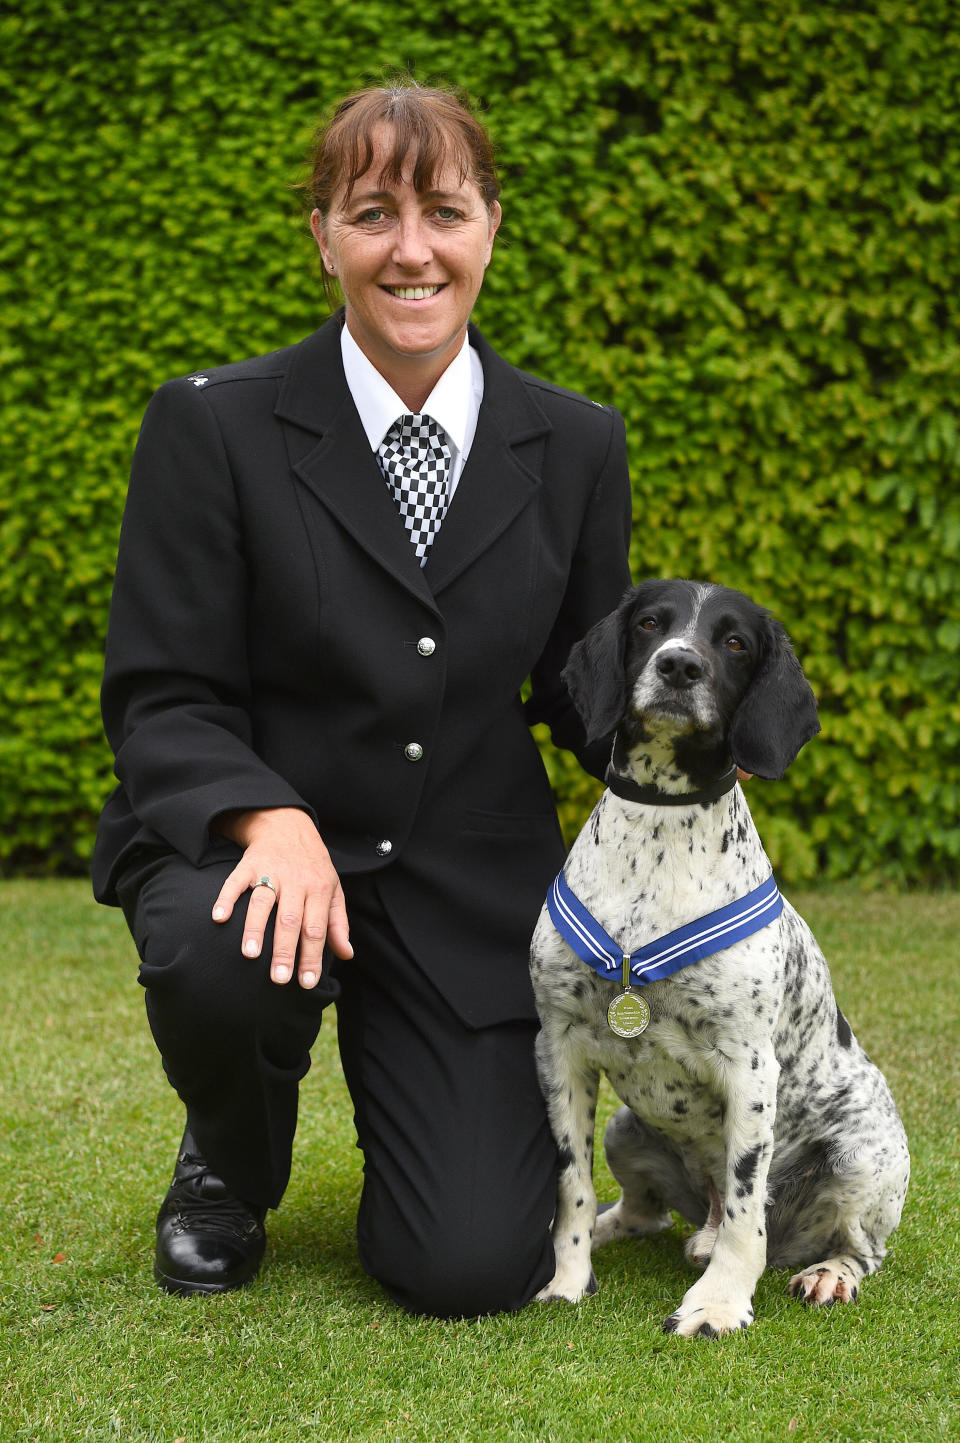 Police dog Ollie, with his handler PC AnnaMarie Charnley, at the Honorable Artillery Company in London receiving the PDSA Order of Merit. Nineteen hero police dogs are receiving an award for helping emergency services during the 2017 London terror attacks at Westminster Bridge, London Bridge and Borough Market.